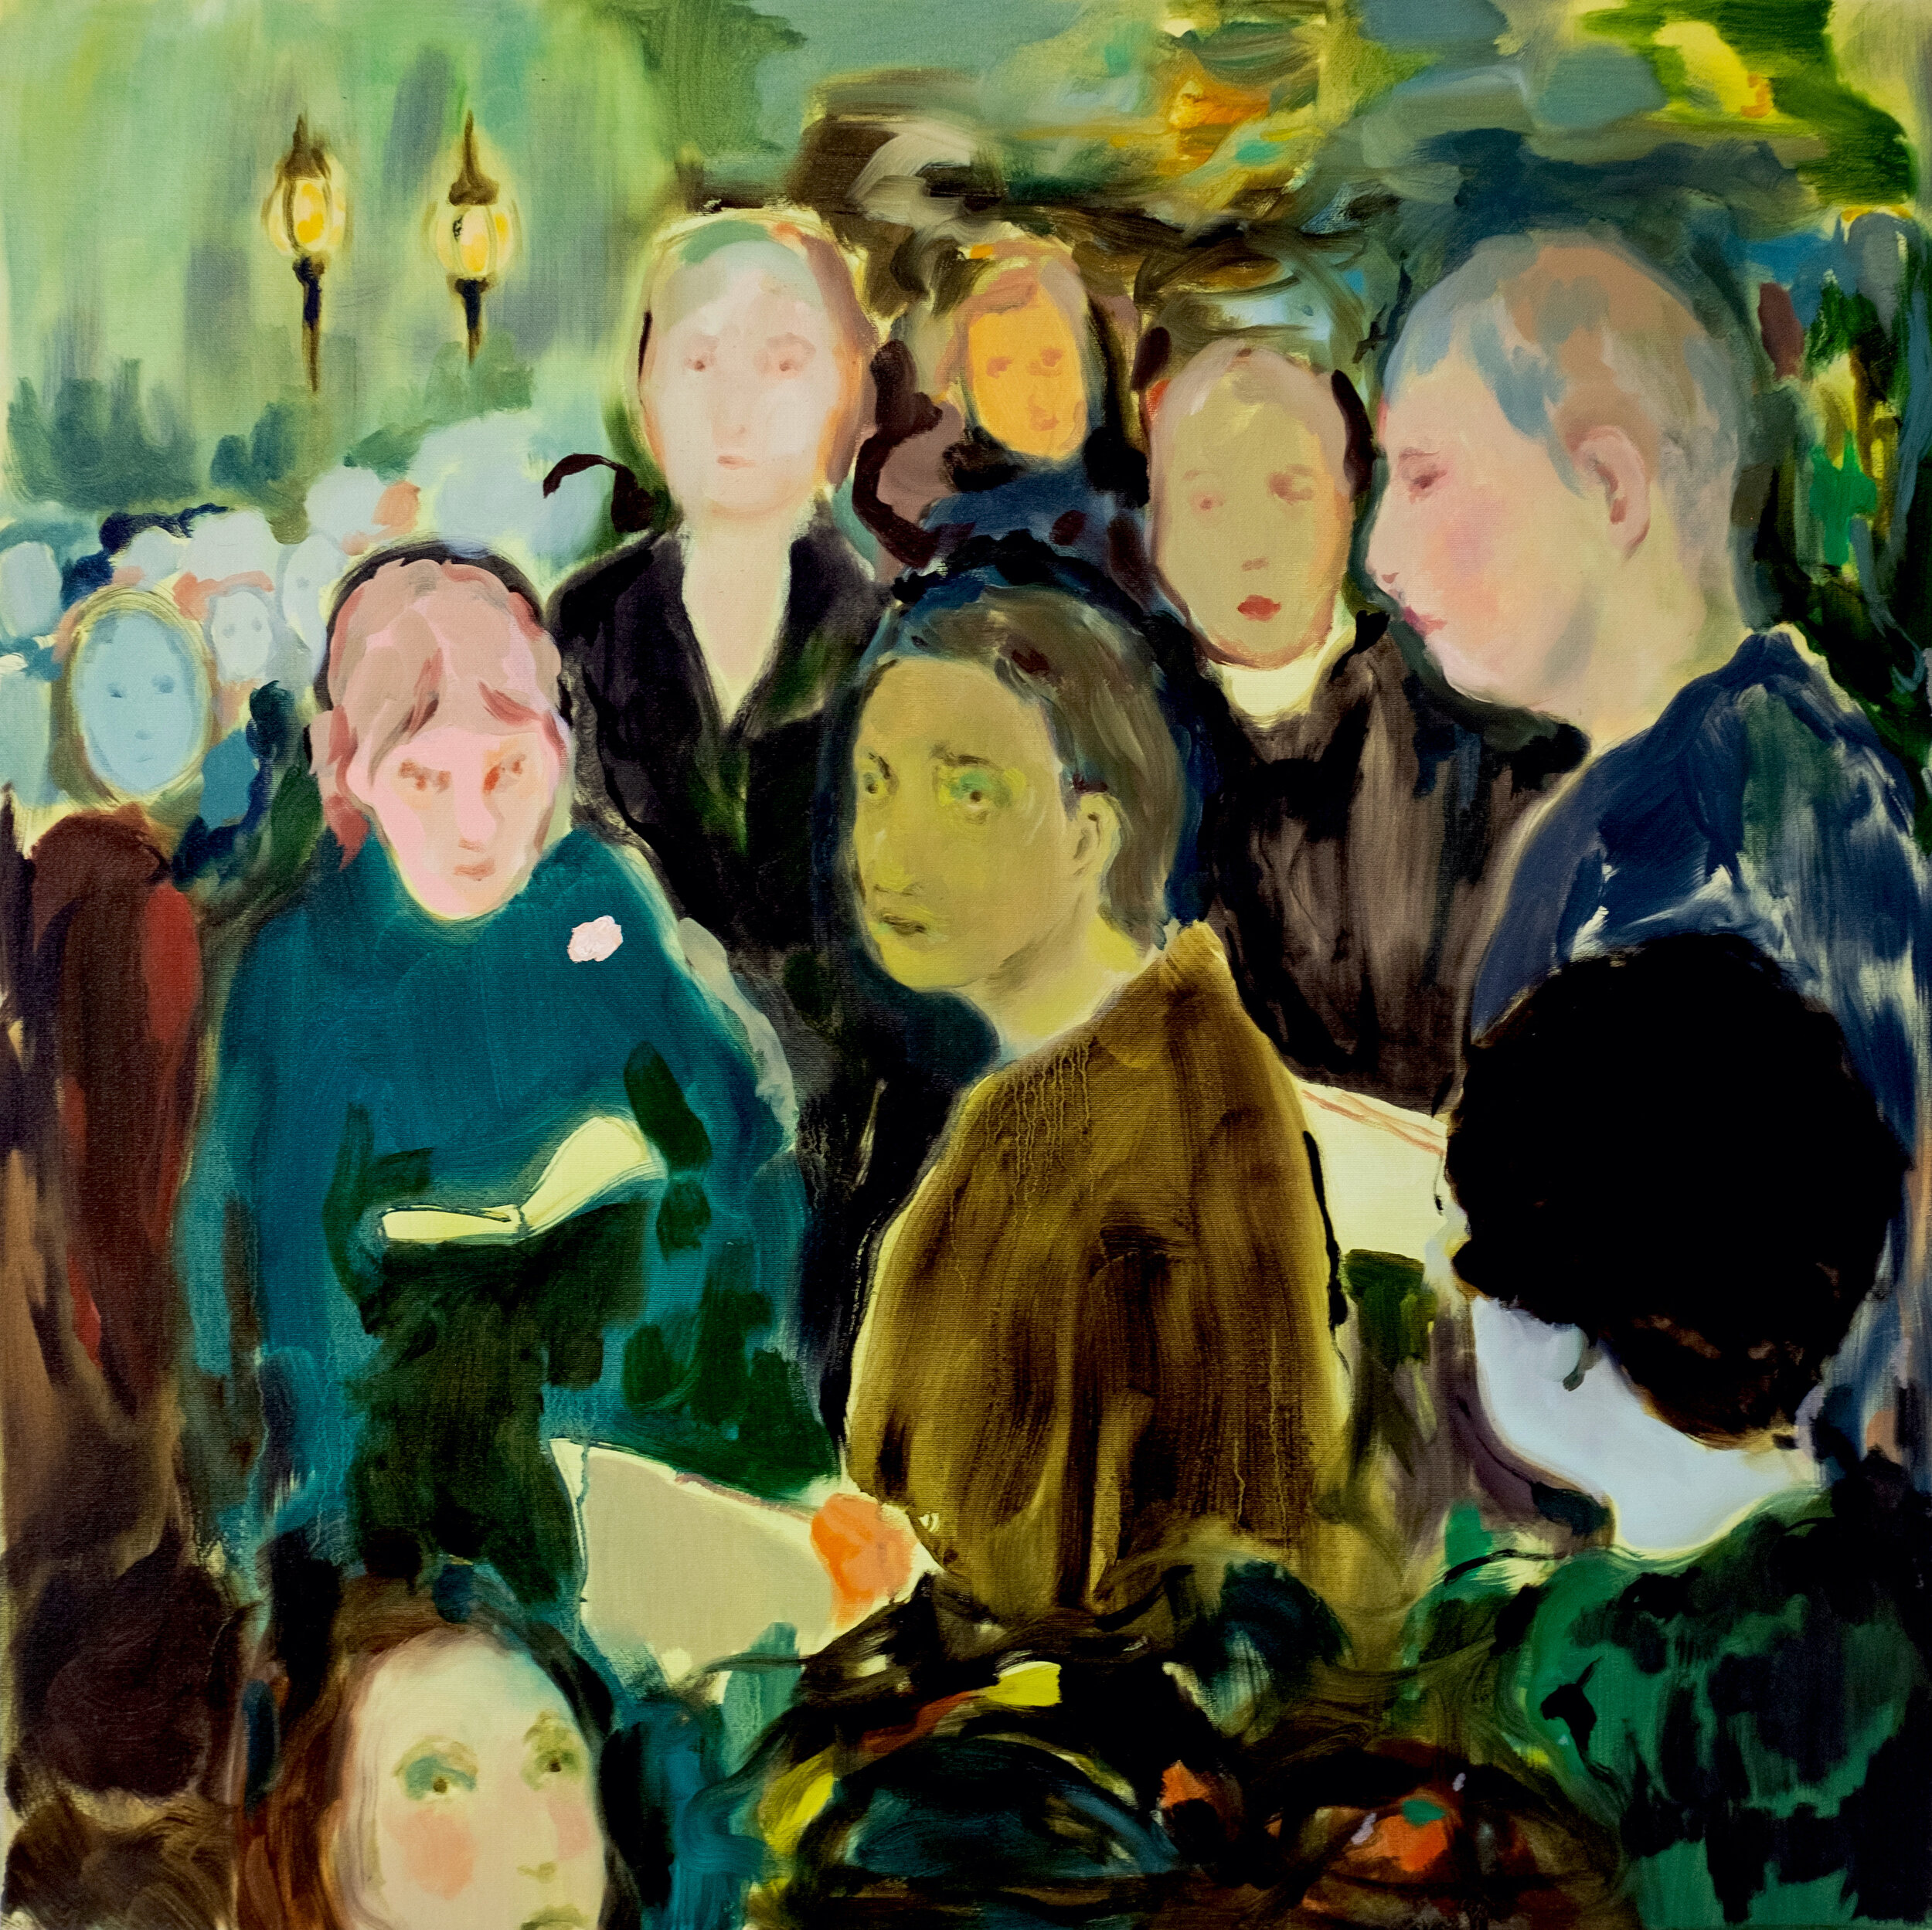  Cathleen Clarke,  All the People From Your Past , 2021. Oil and acrylic on canvas, 36 x 36 inches. ©Cathleen Clarke, courtesy of Fou Gallery 